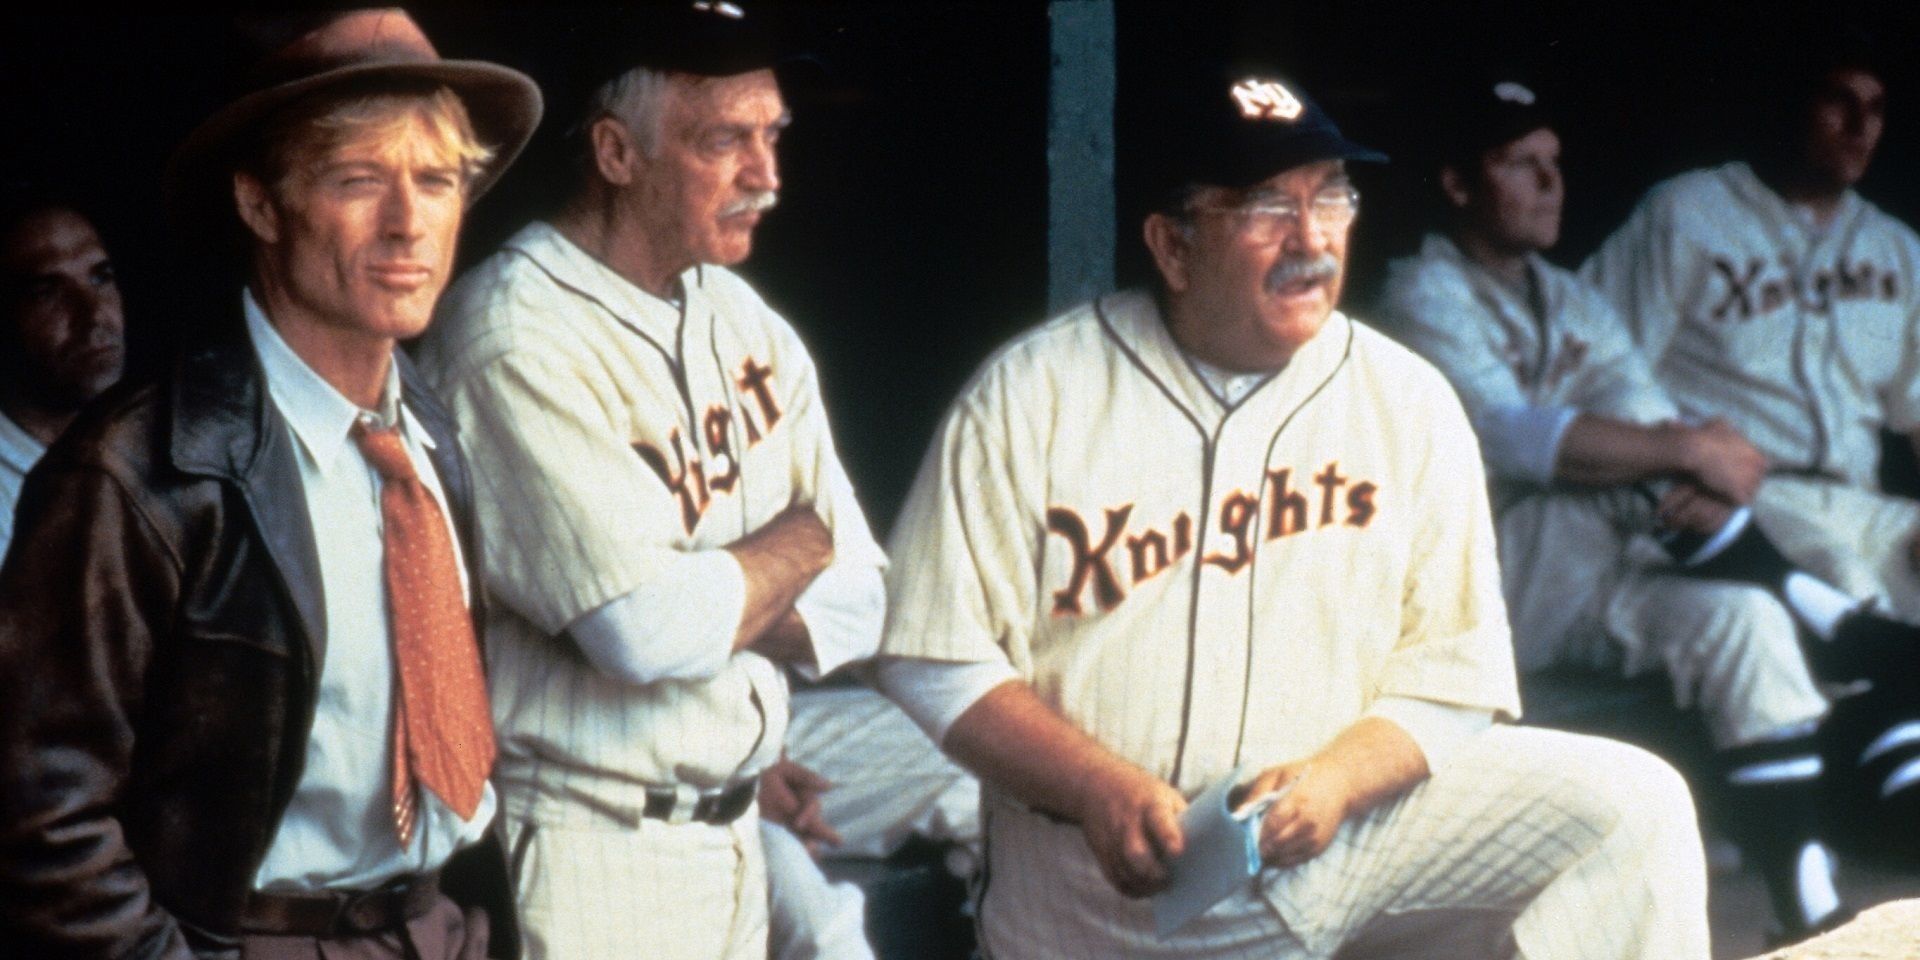 Robert Redford and Wilford Brimley in dugout in The Natural